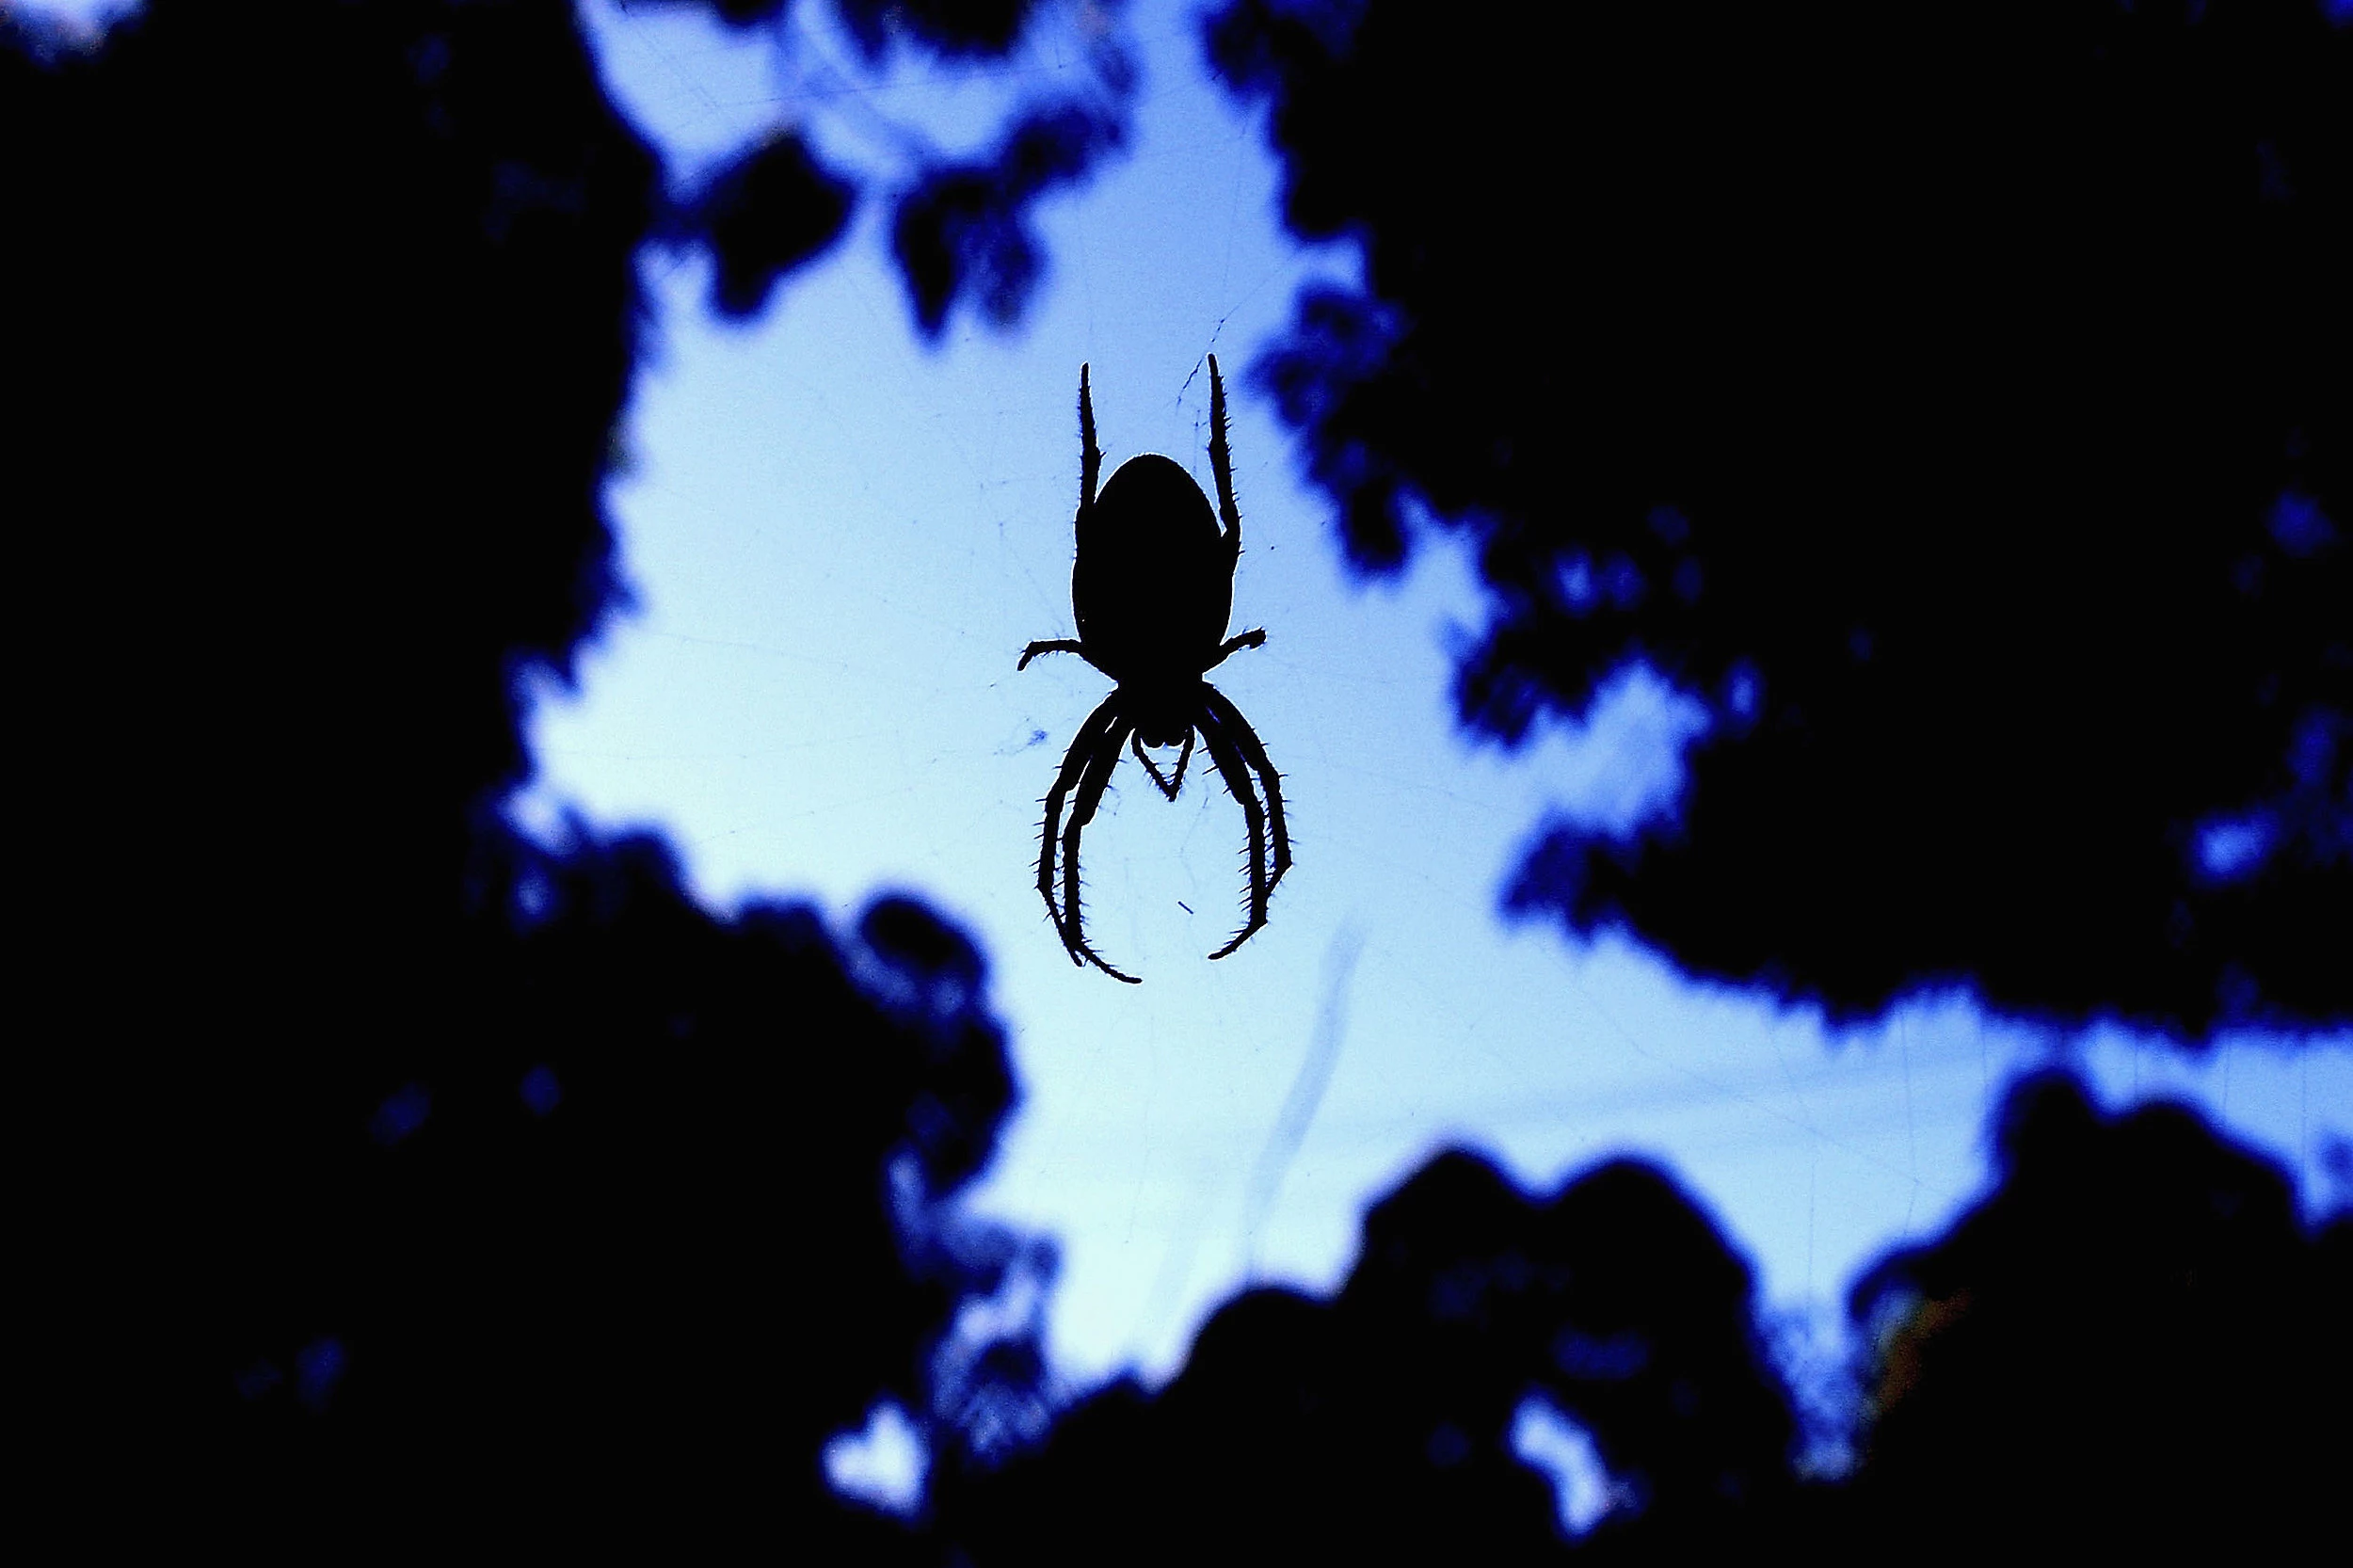 Facts By Mind on Instagram: Have you seen this?? Spider season starts in  spring in southern Australia, while northern Australia is a bit less clear  as temperatures are warmer year-round but populations